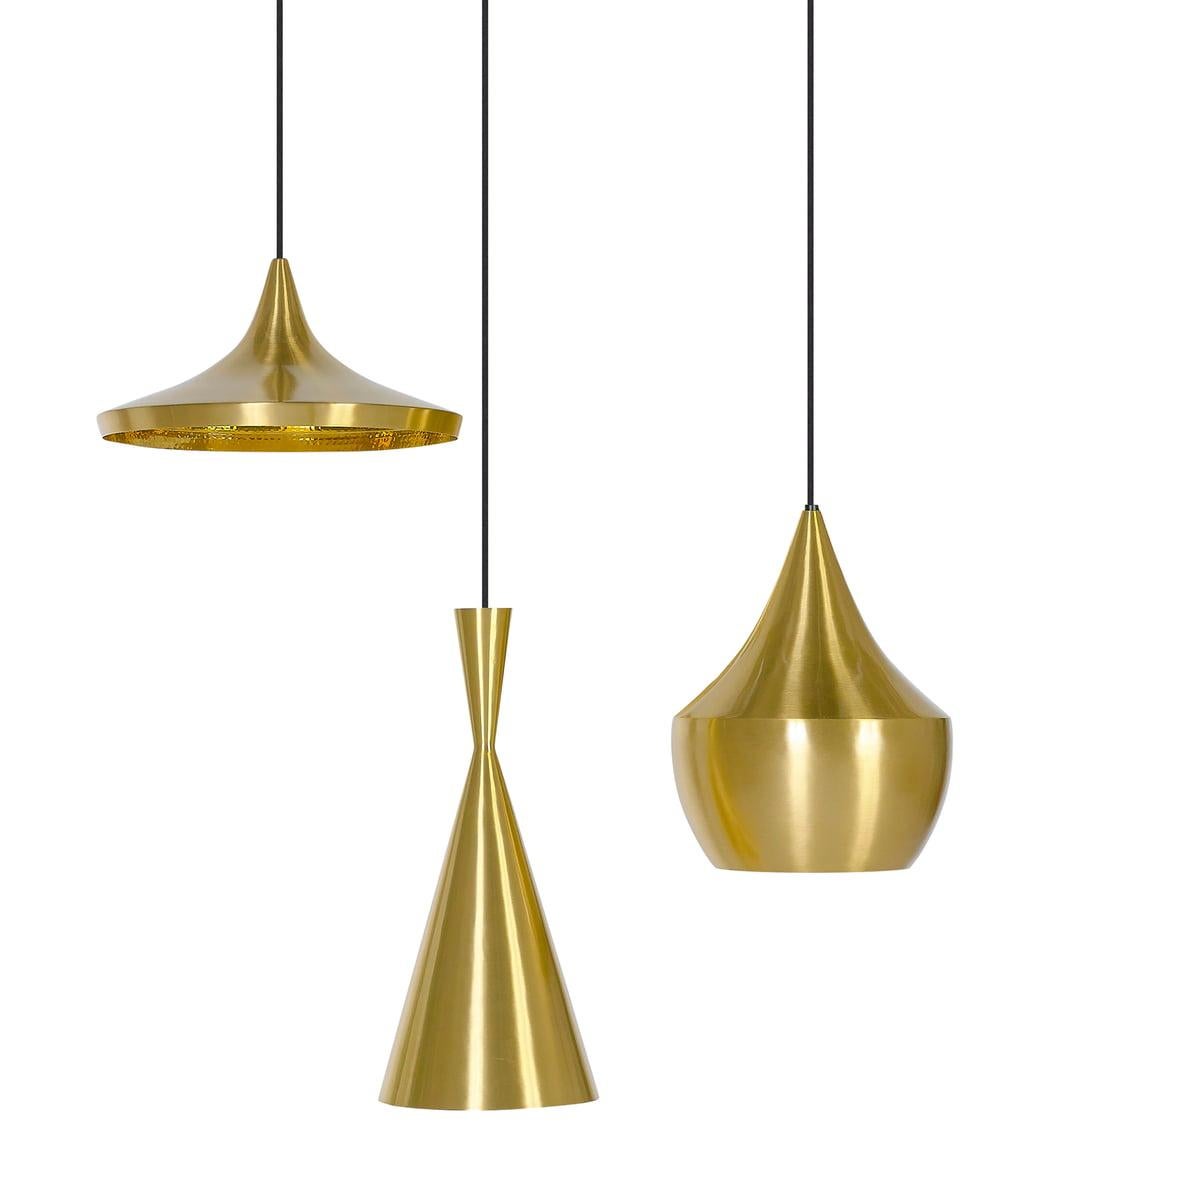 Minimal Tom Dixon Beat Fat brass pendant gold hammered light fixture, contemporary. Gorgeous piece. Retails for 575 USD. 

The Tom Dixon Beat Fat pendant is part of a series of lights inspired by the handmade brass cooking pots and water vessels